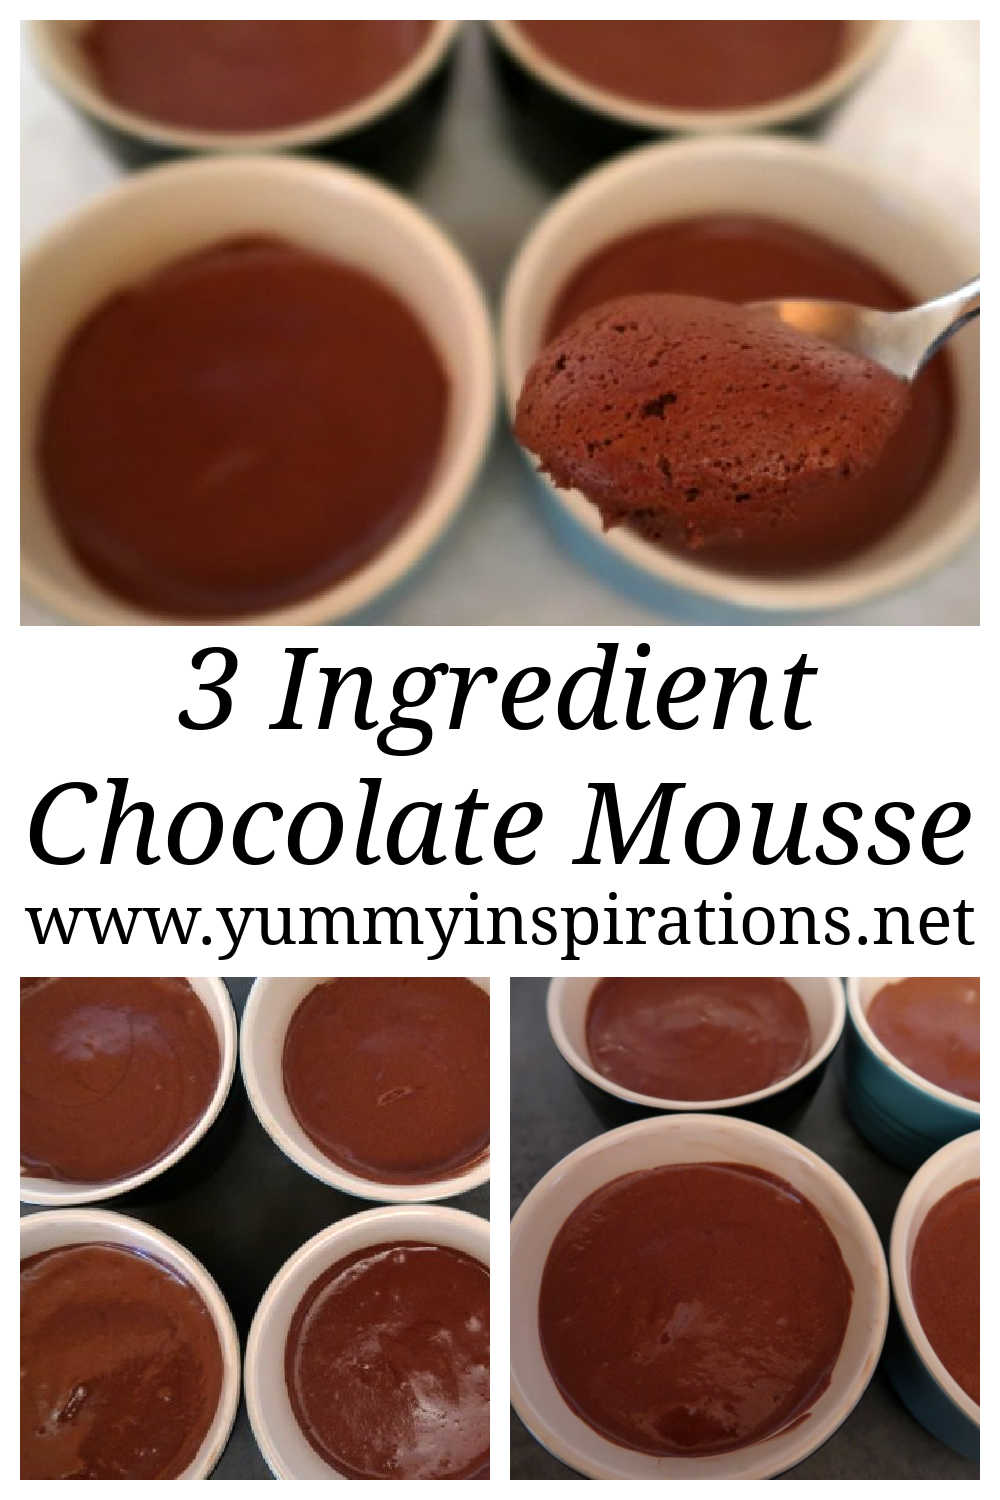 3 Ingredient Chocolate Mousse Recipe - How To Make An Easy No Bake Dark Chocolate Mousse Dessert with only 3 ingredients - plus the step by step video tutorial.